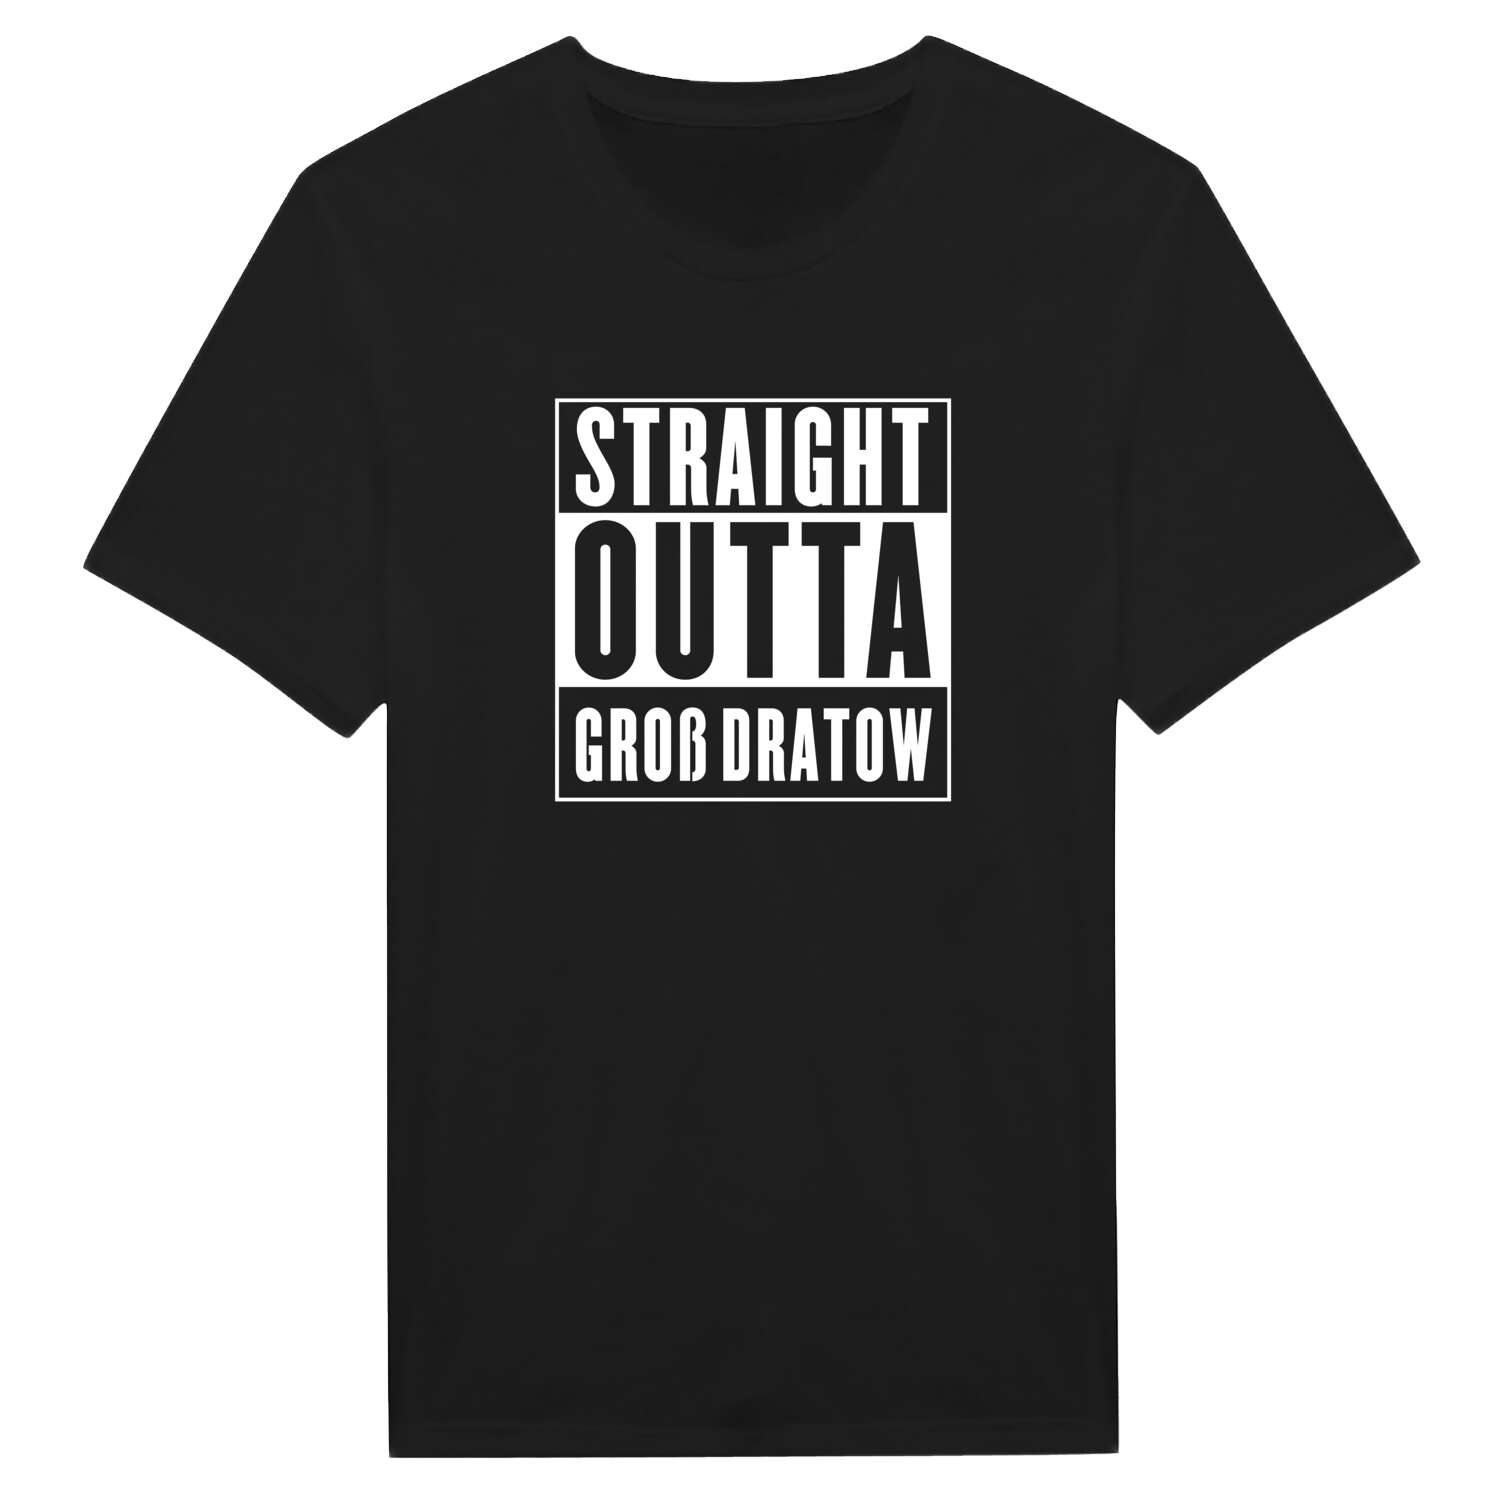 Groß Dratow T-Shirt »Straight Outta«